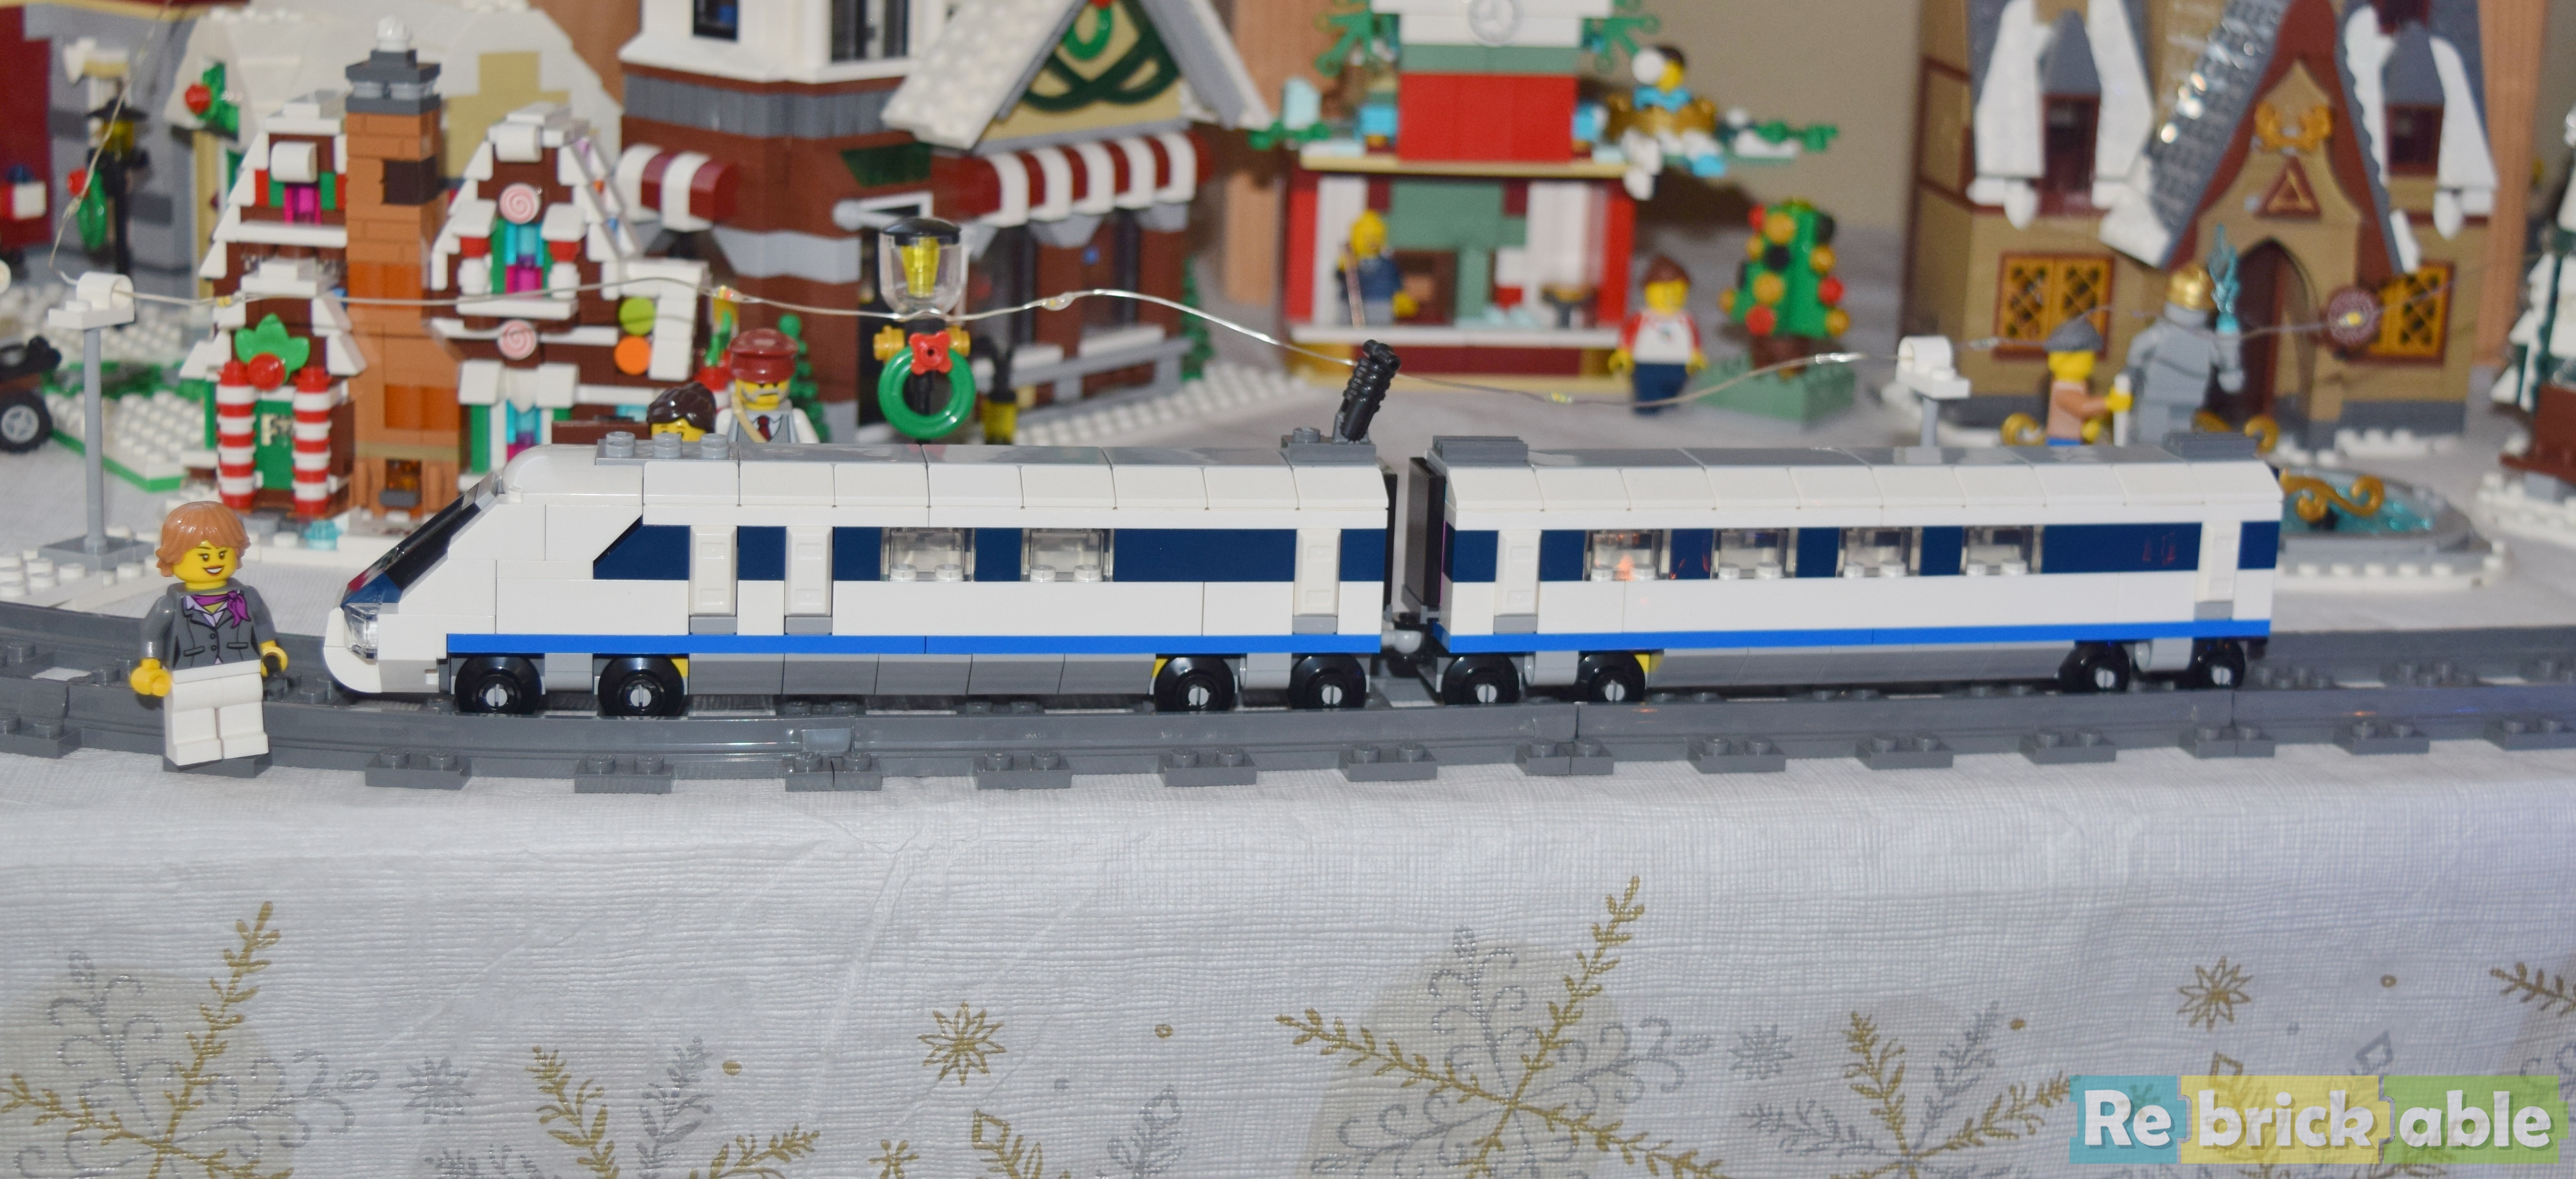 LEGO 40518 High-Speed Train - Faster than a small bullet? [Review] - The  Brothers Brick